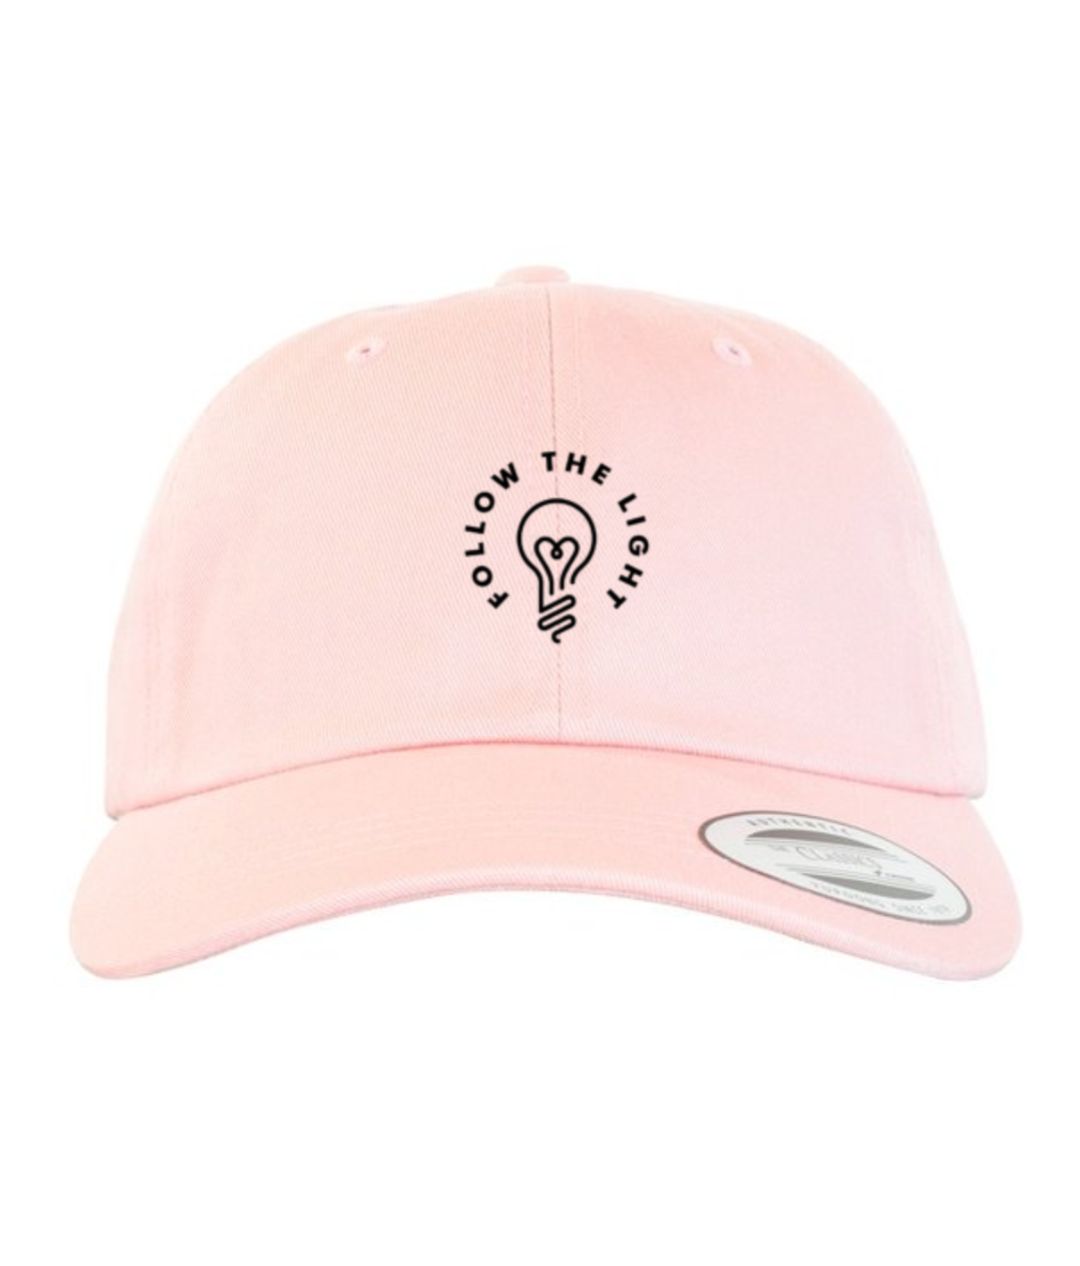 Follow The Light - Dad Hat (Pink)